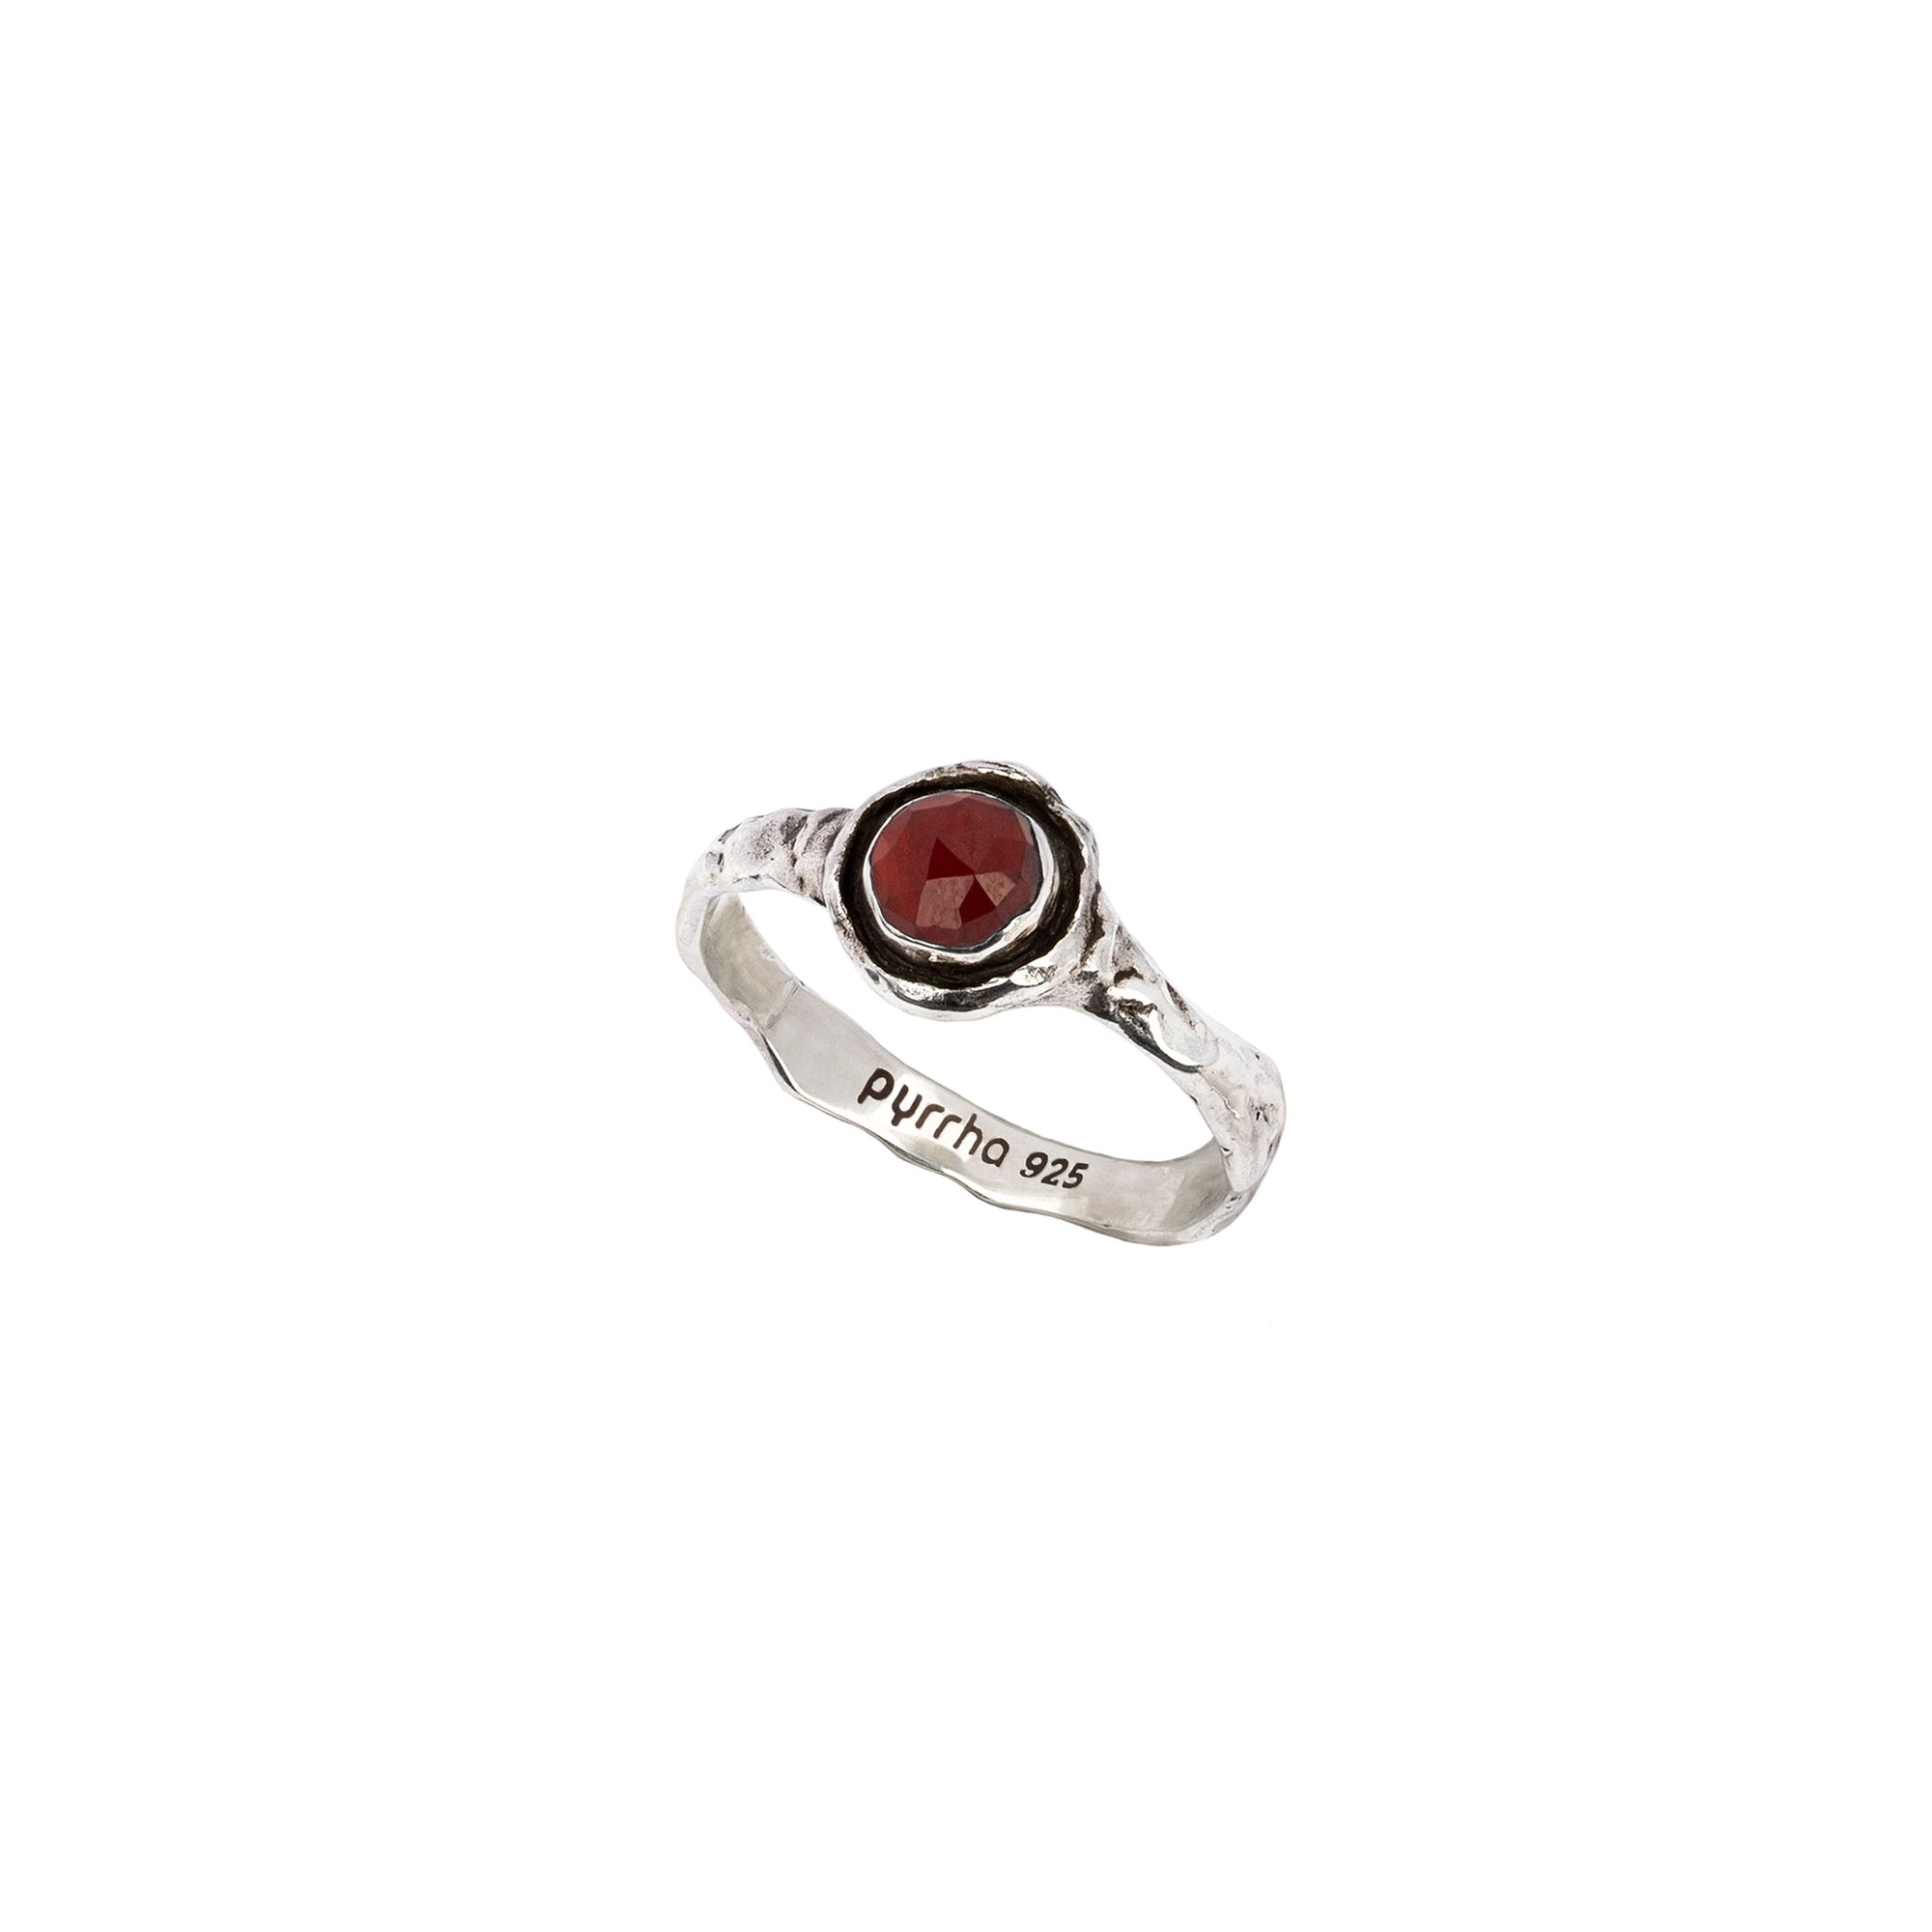 Garnet Small Faceted Stone Talisman Ring